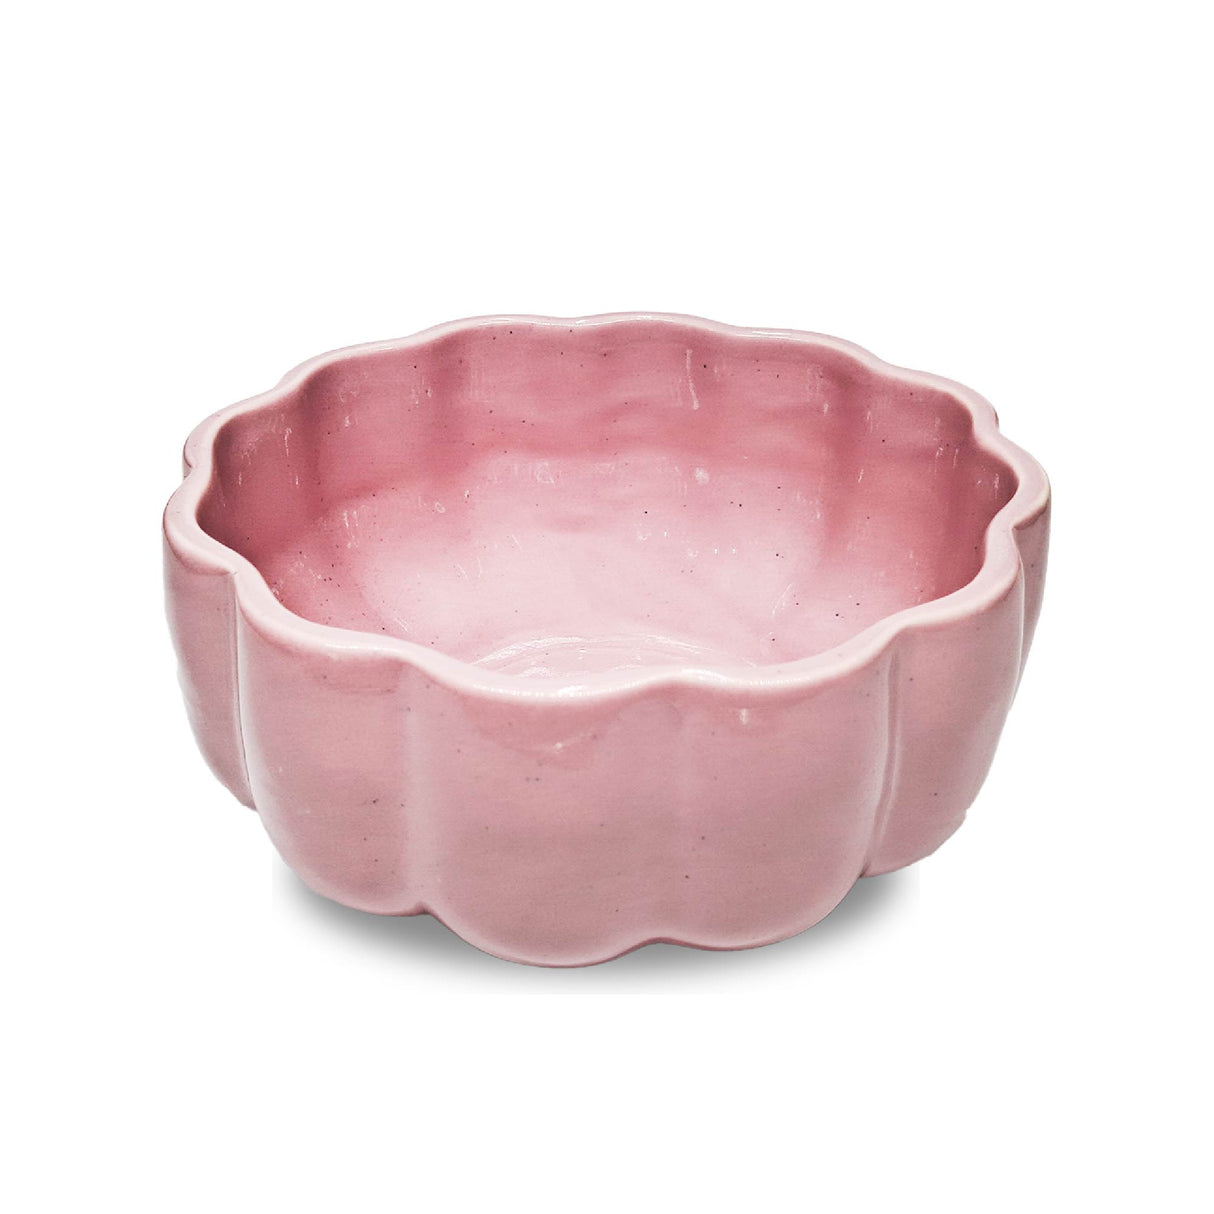 Peach Scalloped serving bowl for mealtime 